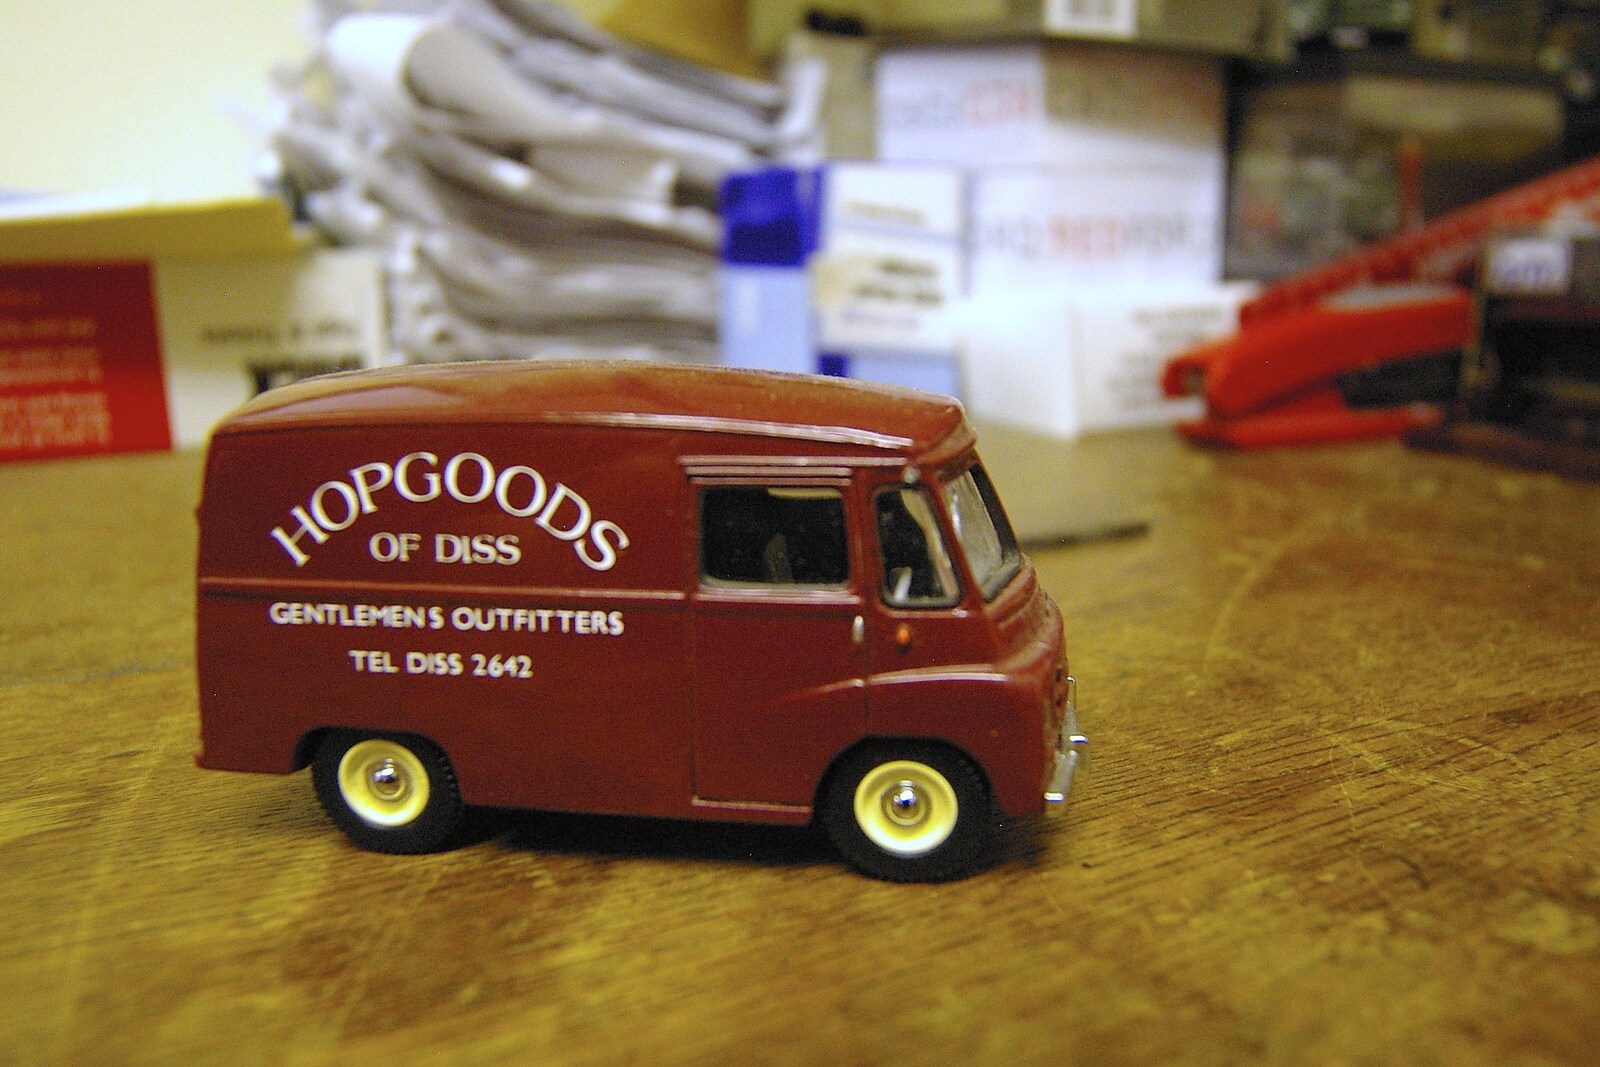 In the office, a small model of a Hopgoods van from A Portrait of Hopgoods: Gentlemen's Outfitters, Diss, Norfolk - 4th January 2006